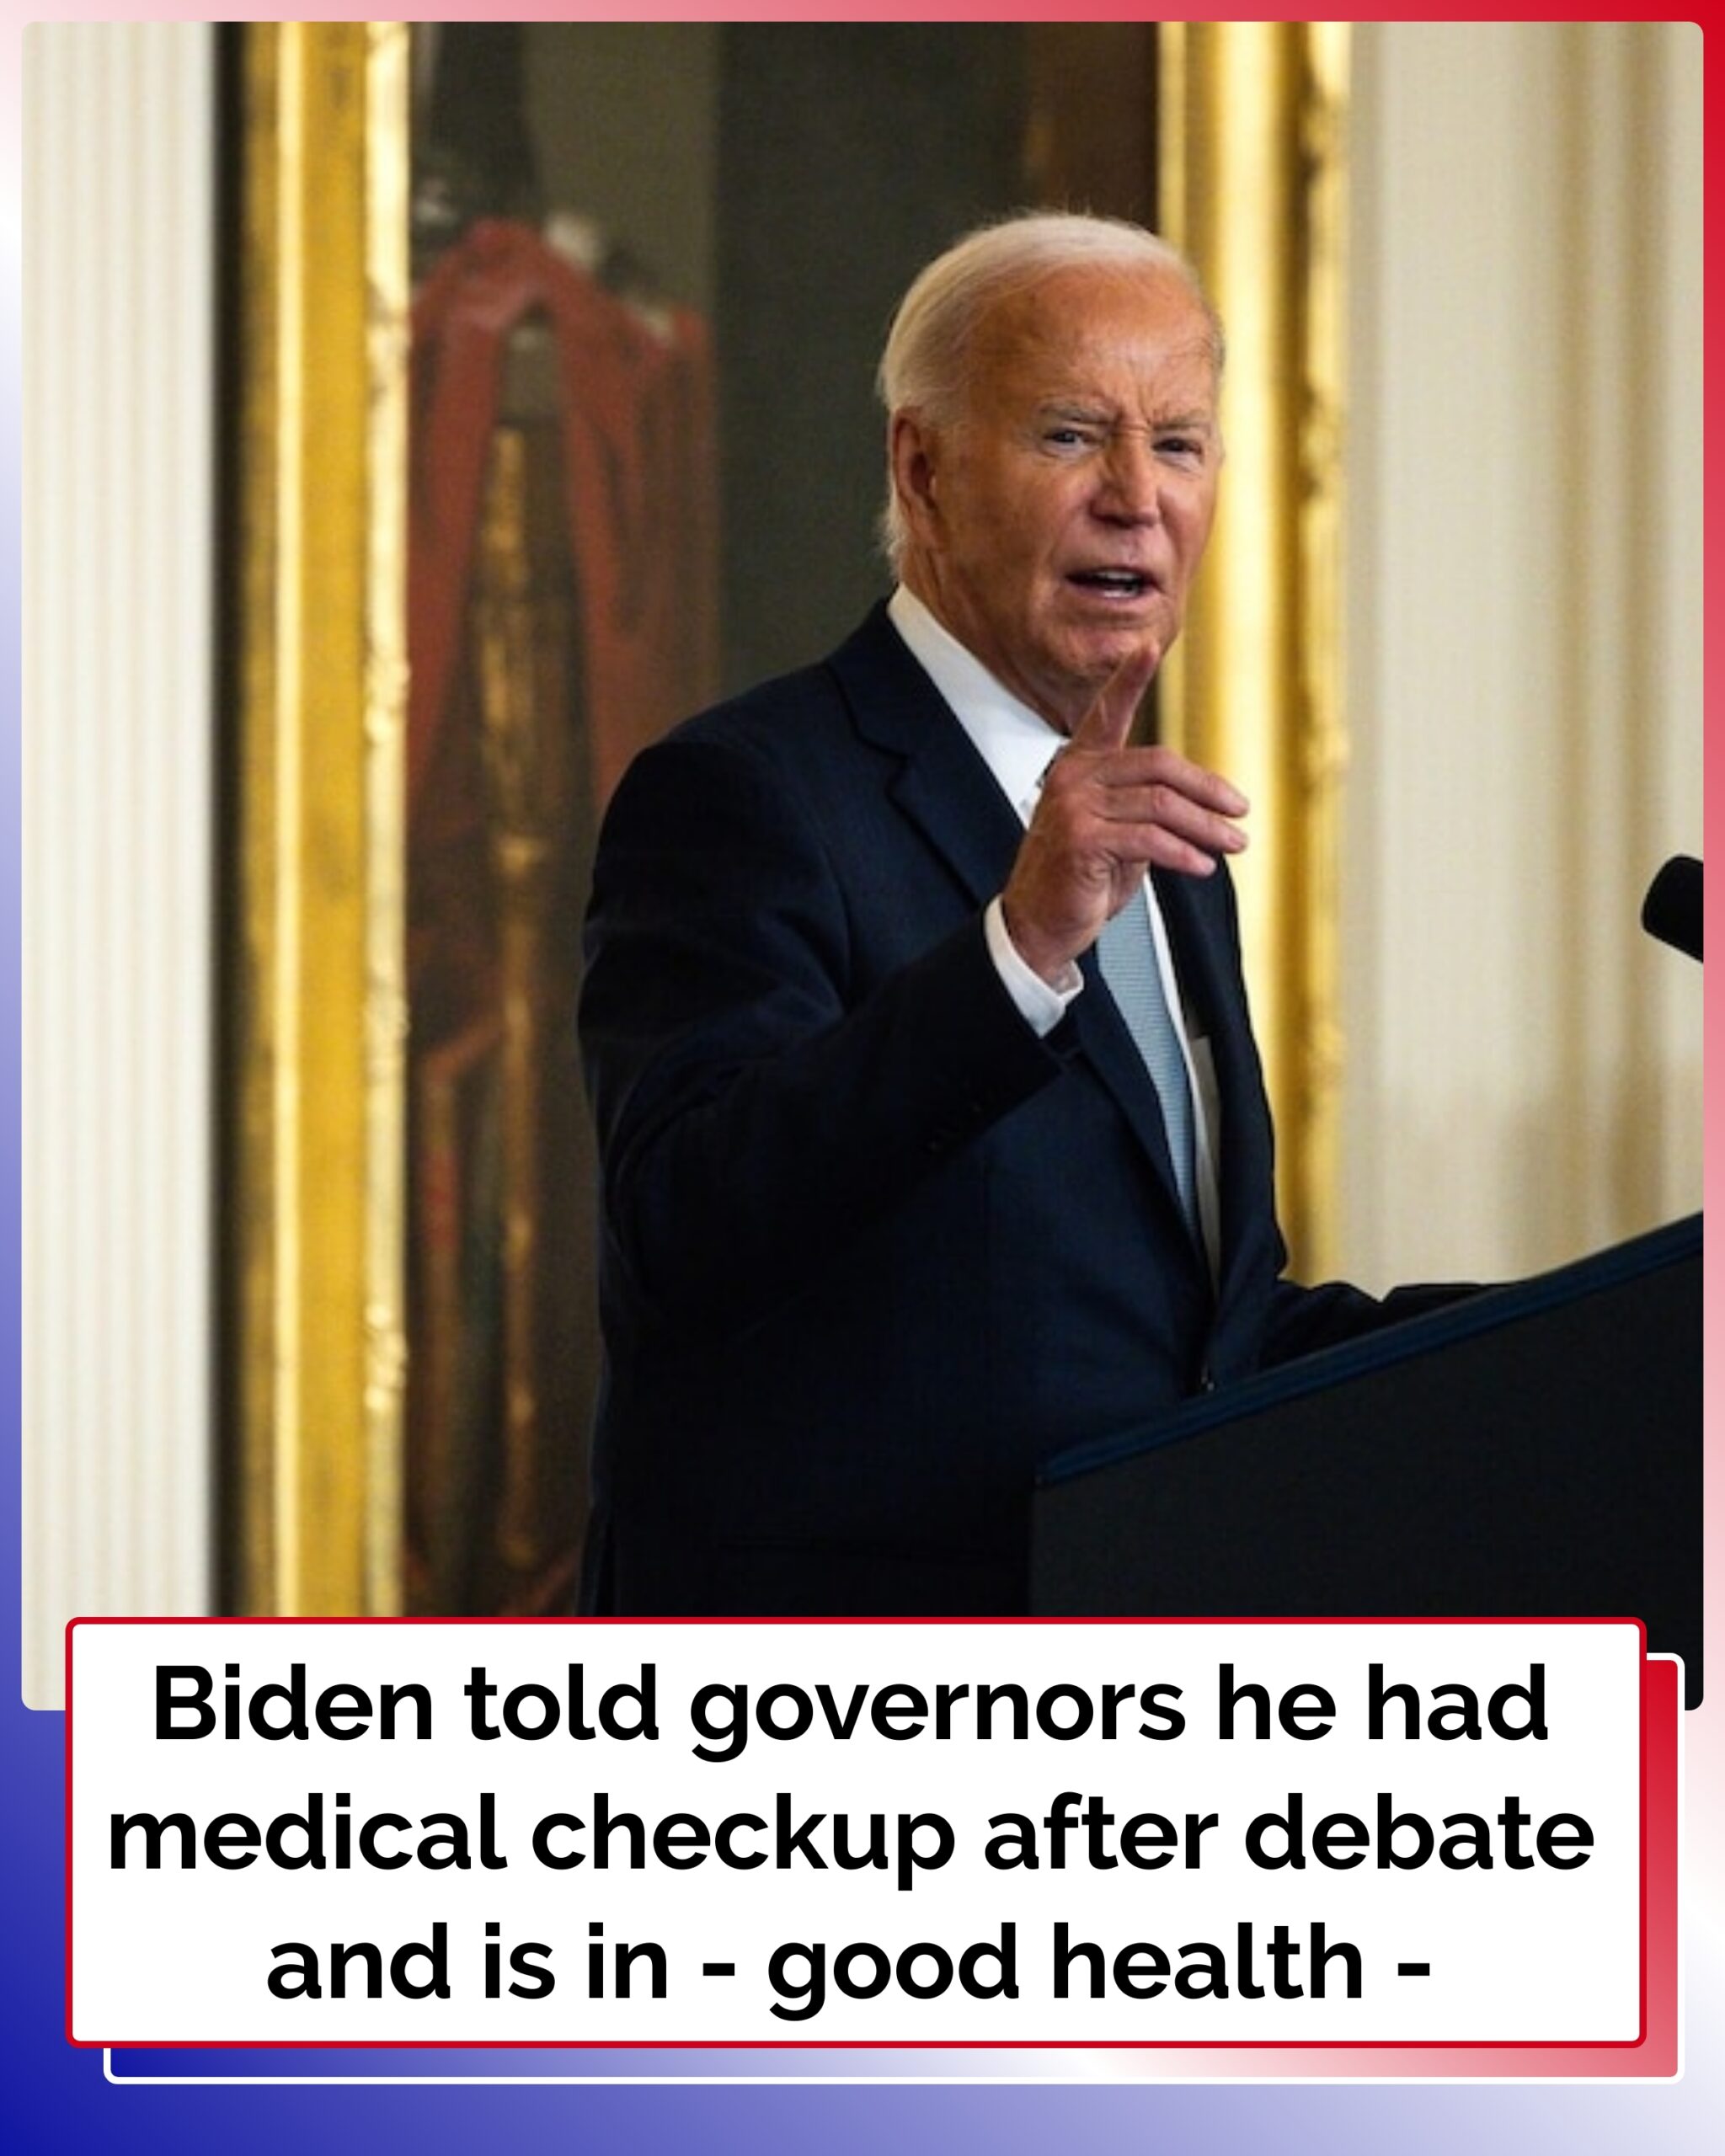 Biden told governors he had medical checkup after debate and is in good health: Sources